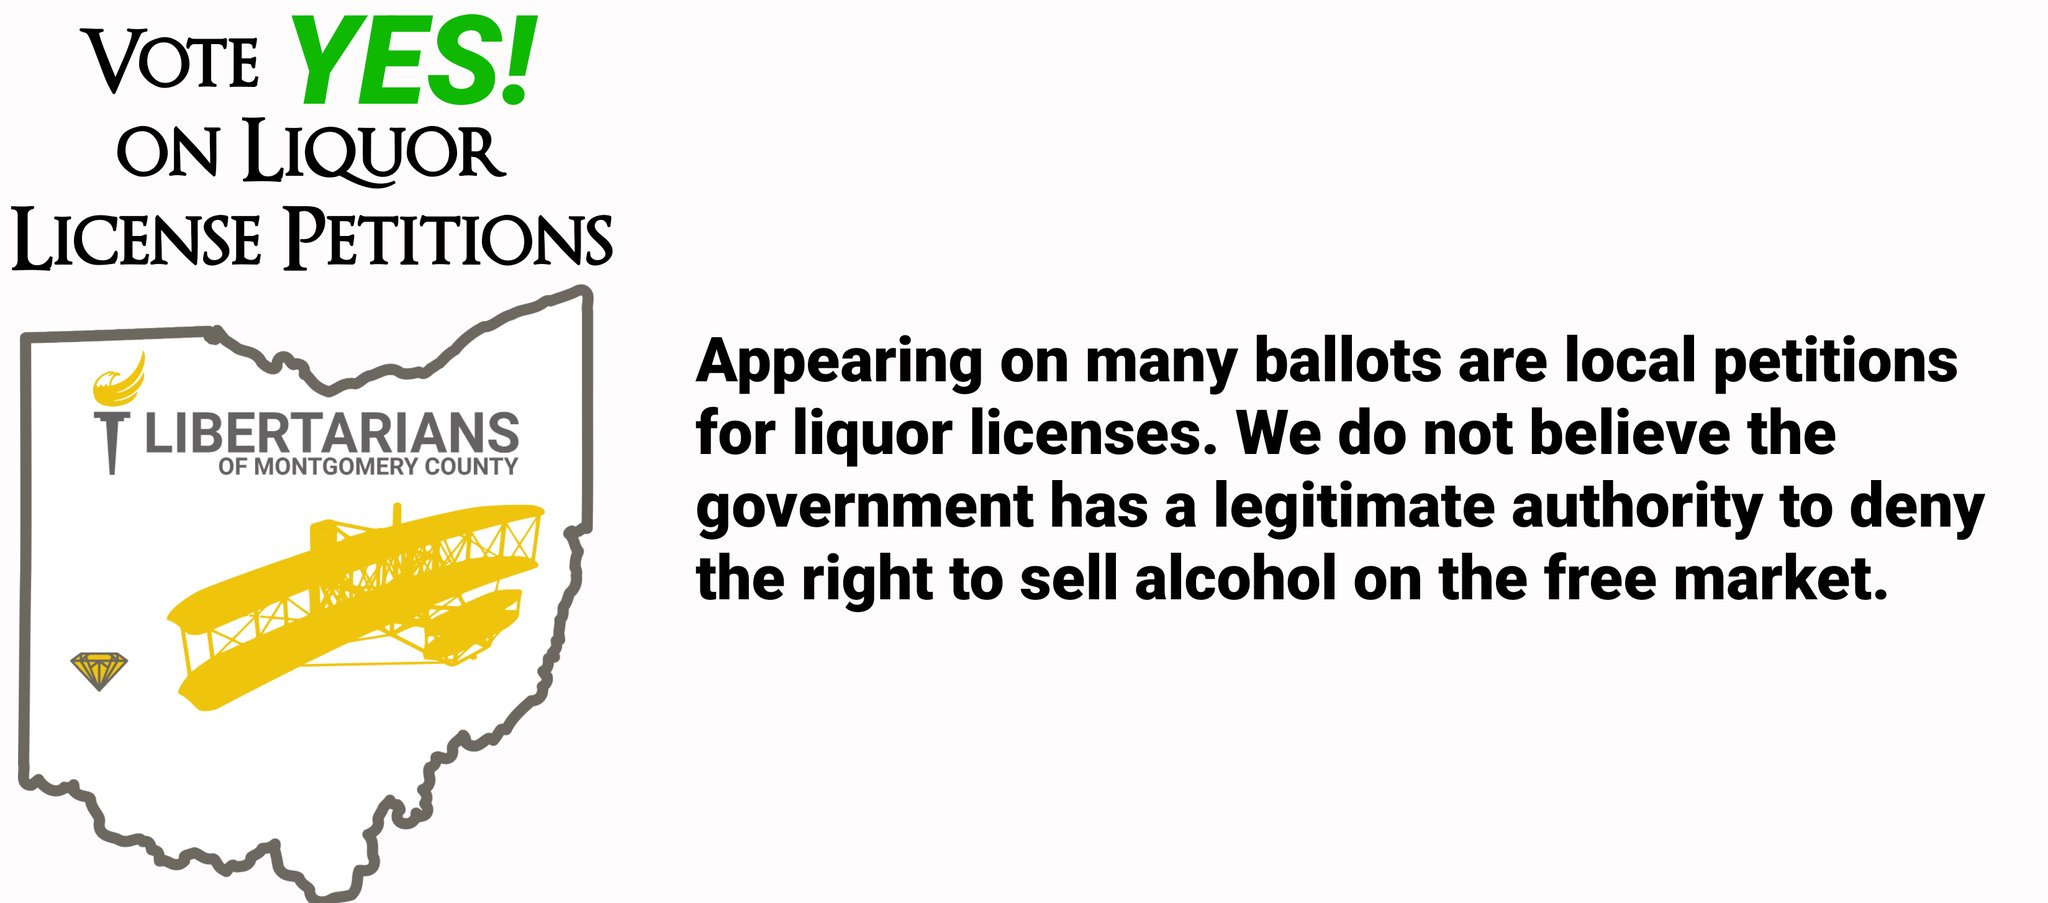 Also appearing on many ballots are local petitions for liquor licenses. We do not believe the government has a legitimate authority to deny the right to sell alcohol on the free market, and so we recommend voting Yes on all of these.